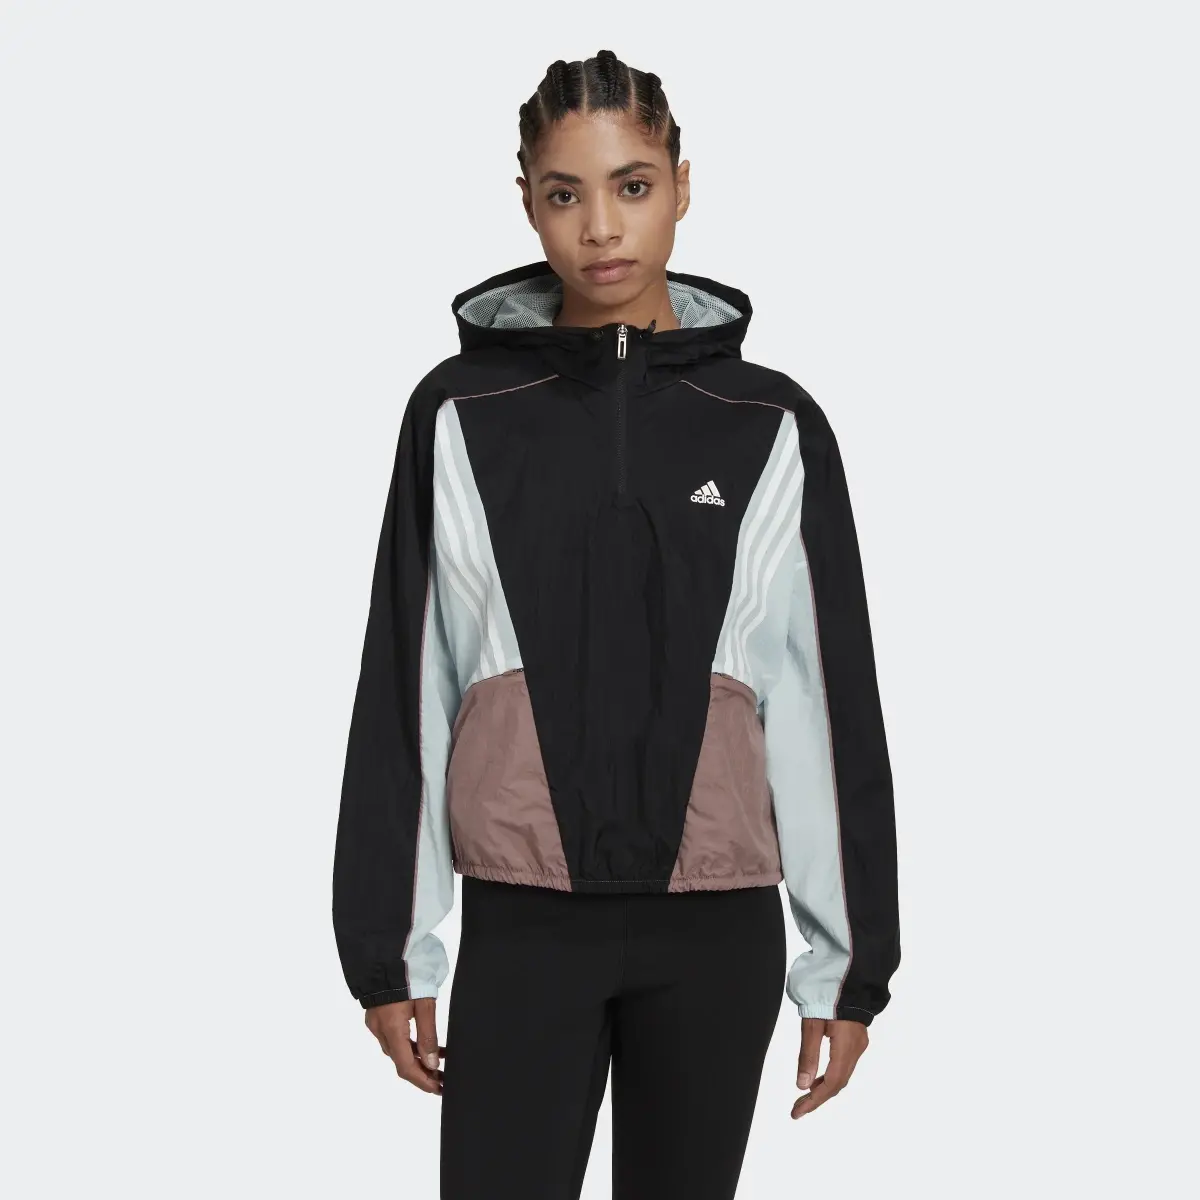 Adidas Hyperglam Hooded Track Top. 2